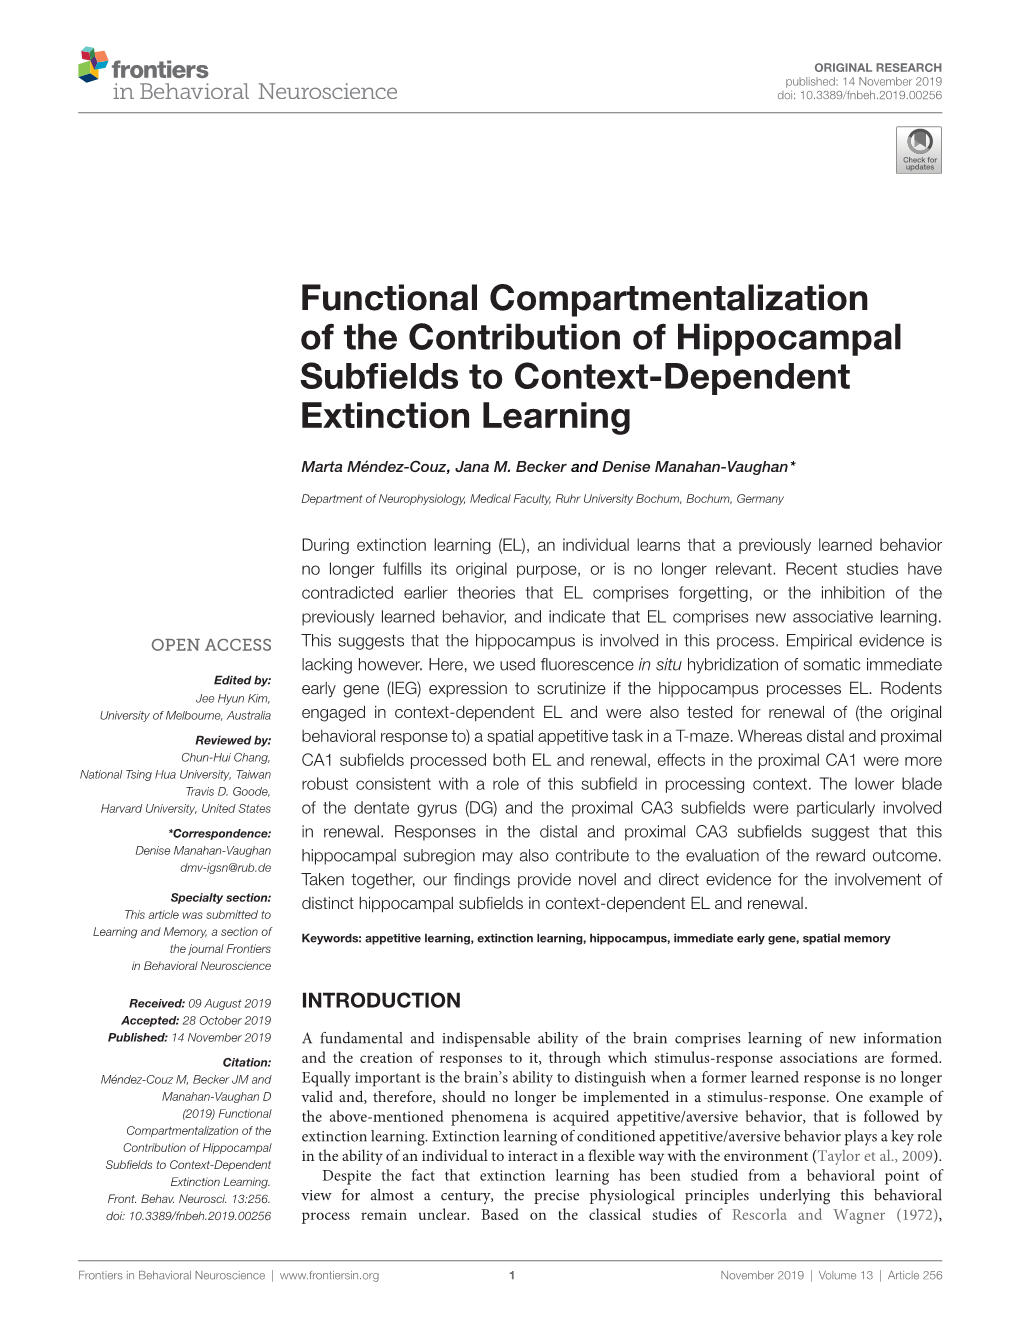 Functional Compartmentalization of the Contribution of Hippocampal Subﬁelds to Context-Dependent Extinction Learning